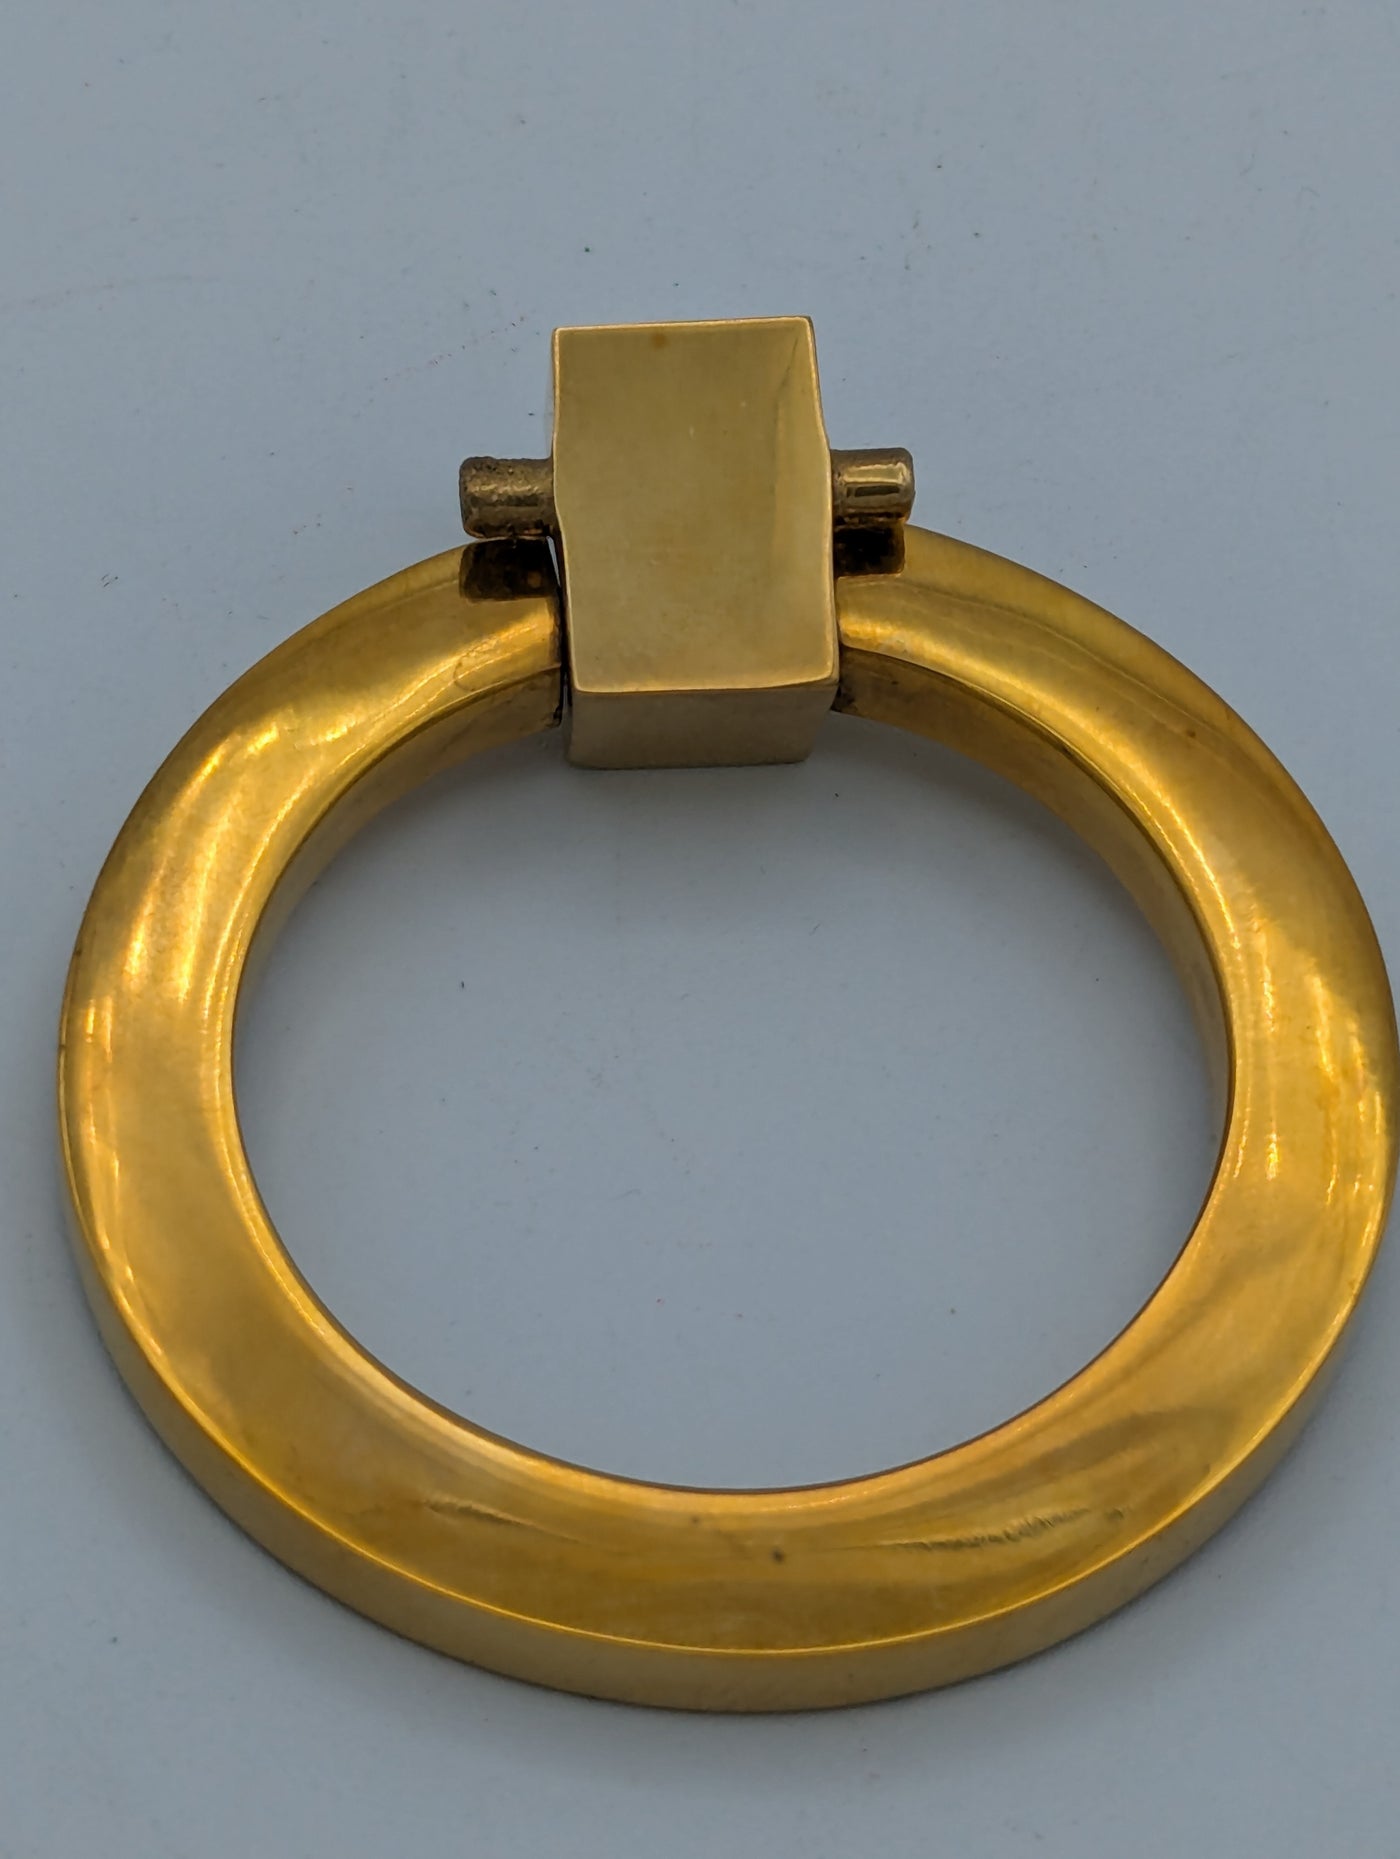 Open Box Sale Item 3 Inch Mission Style Solid Brass Drawer Ring Pull (Polished Brass Finish)